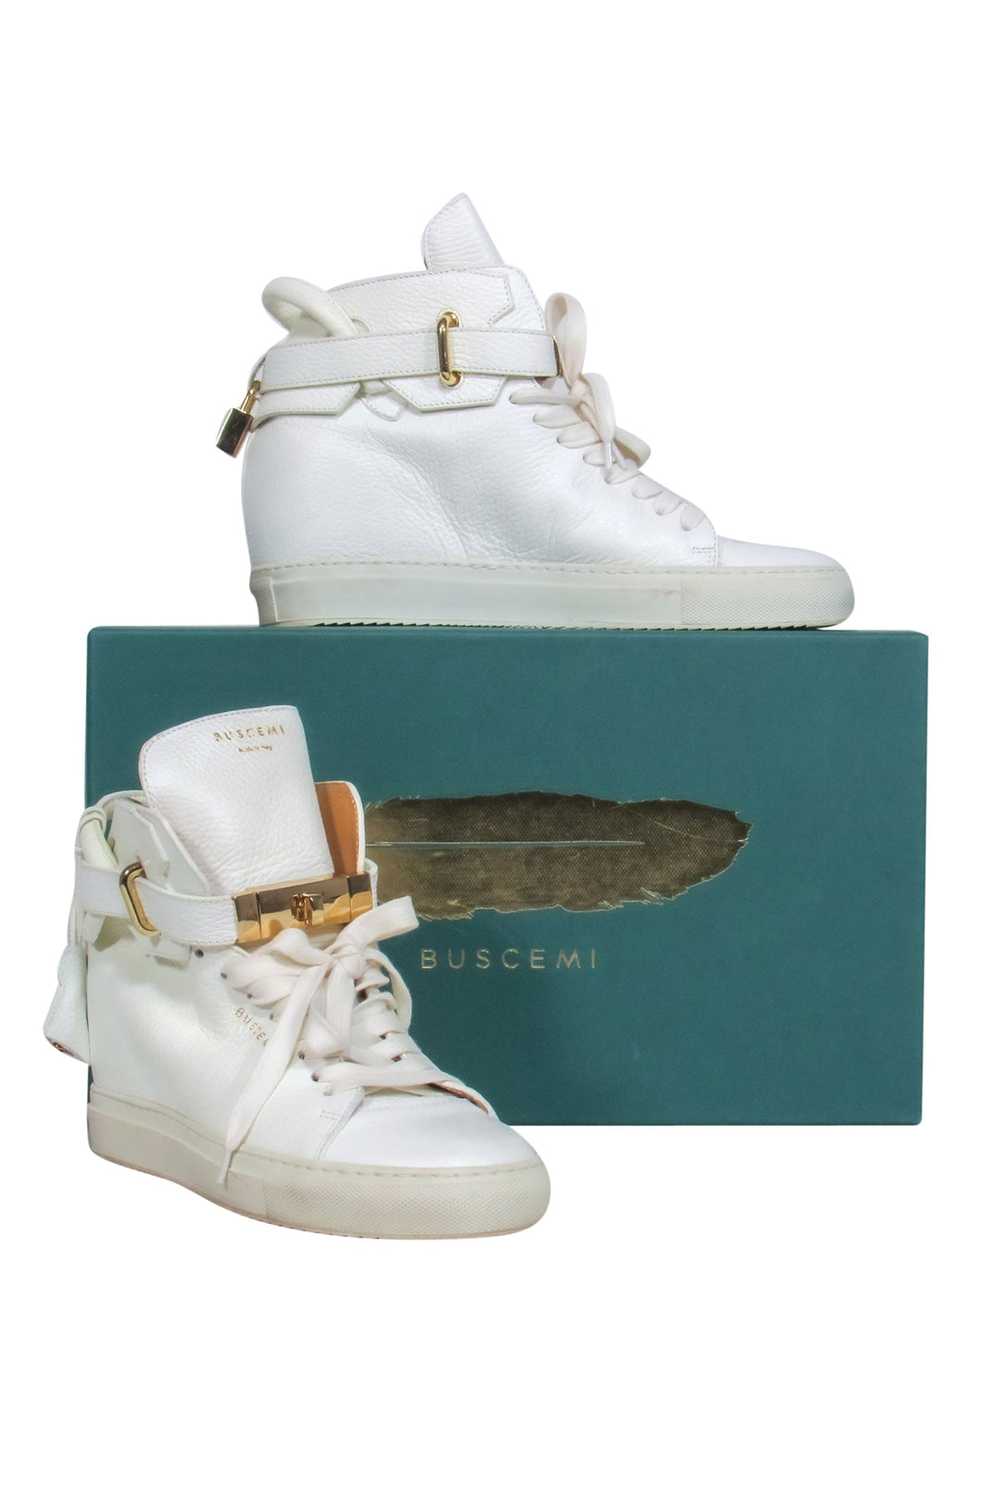 Buscemi - White 100MM Sneakers w/ Gold-Toned Hard… - image 1